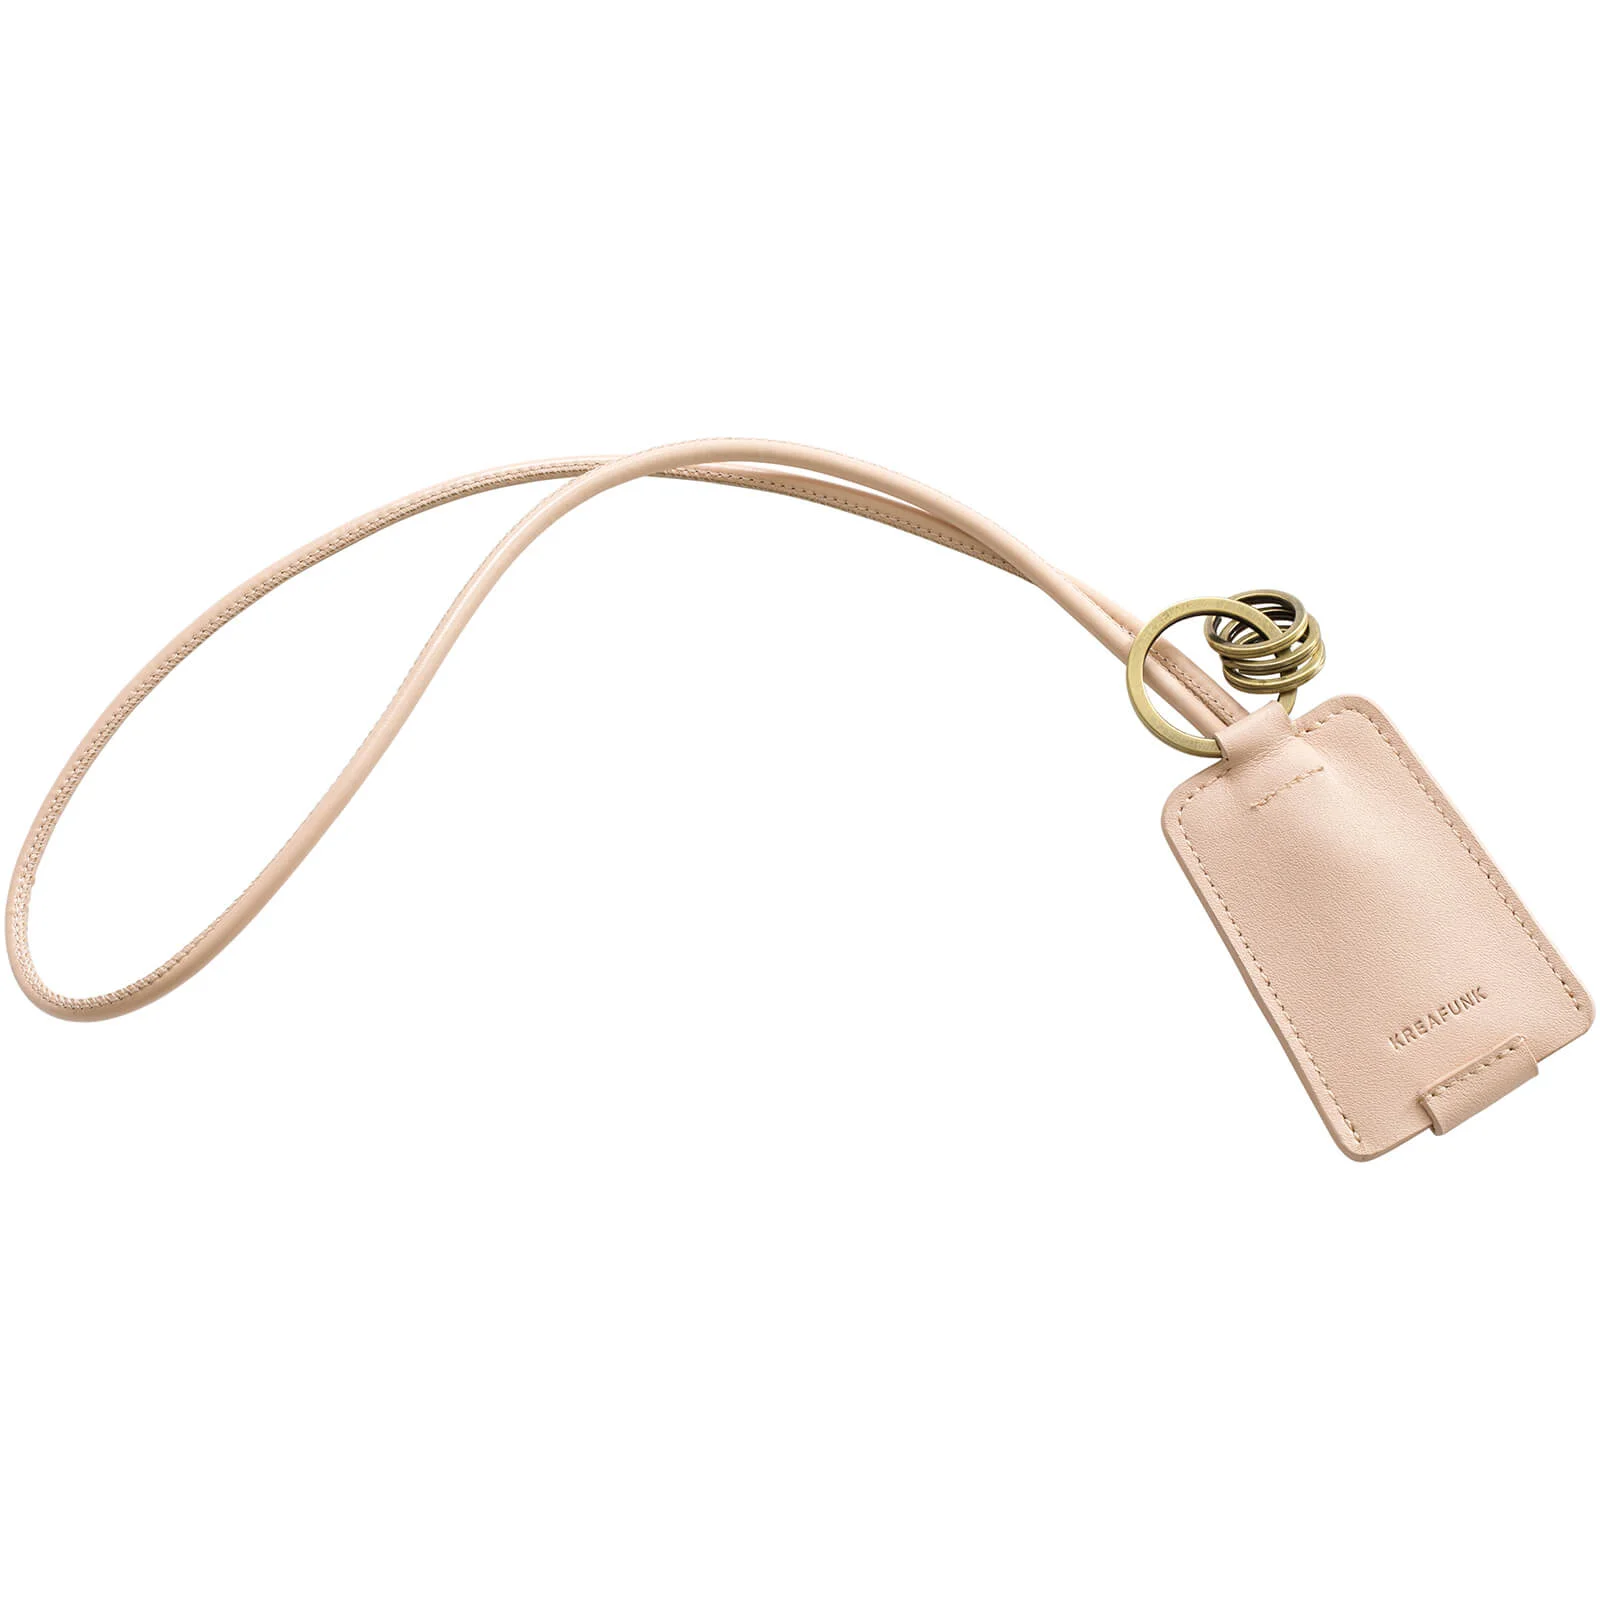 Kreafunk cCHAIN Leather Keyhanger and Charging Cable - Nude Image 1